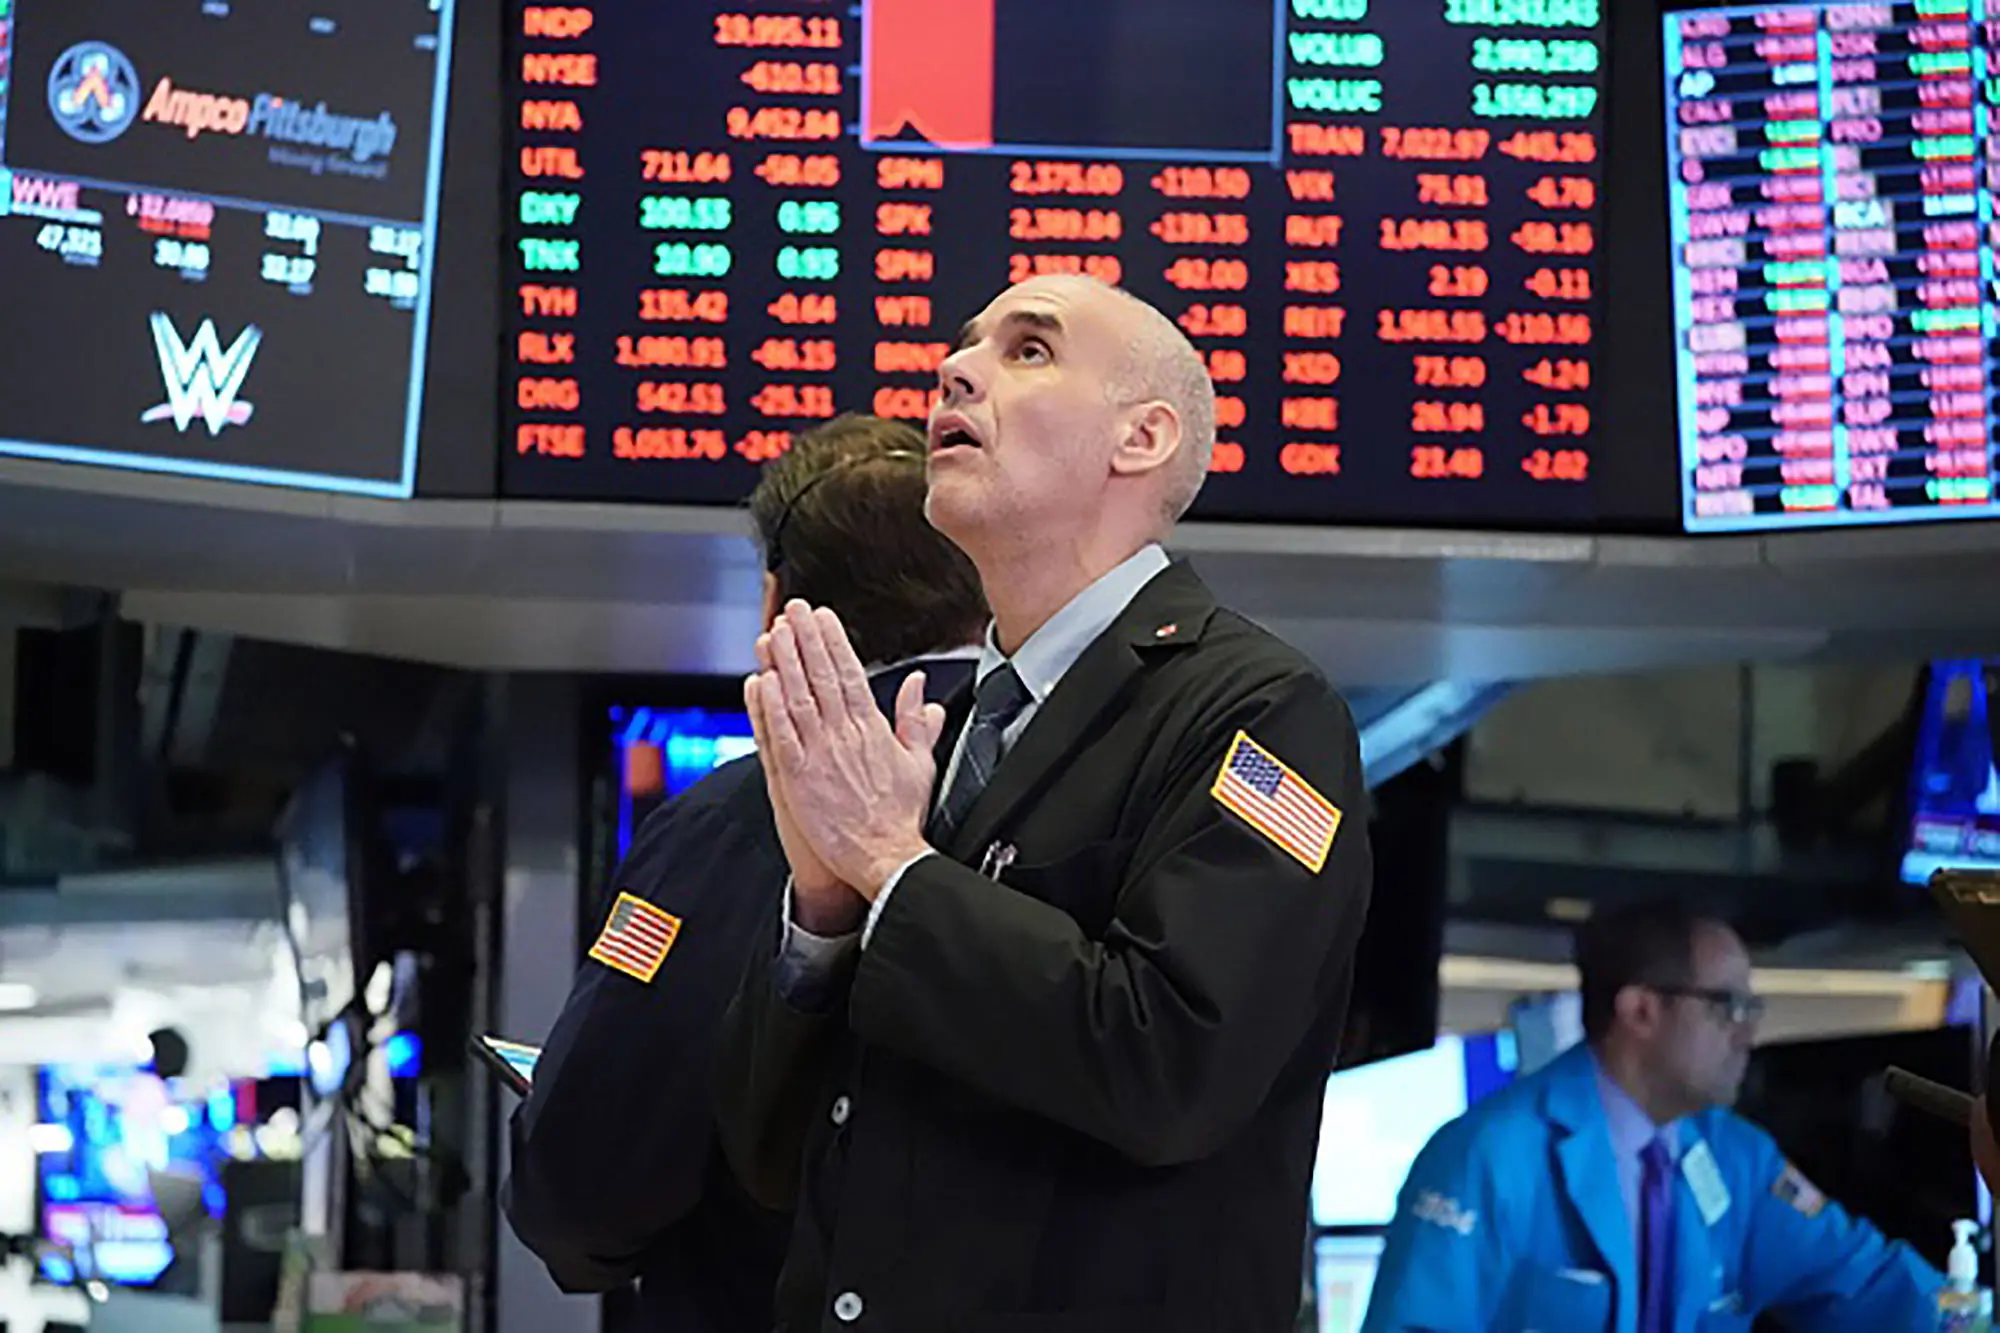 Stock Markets Tumble as Inflation Fears Grip World Markets